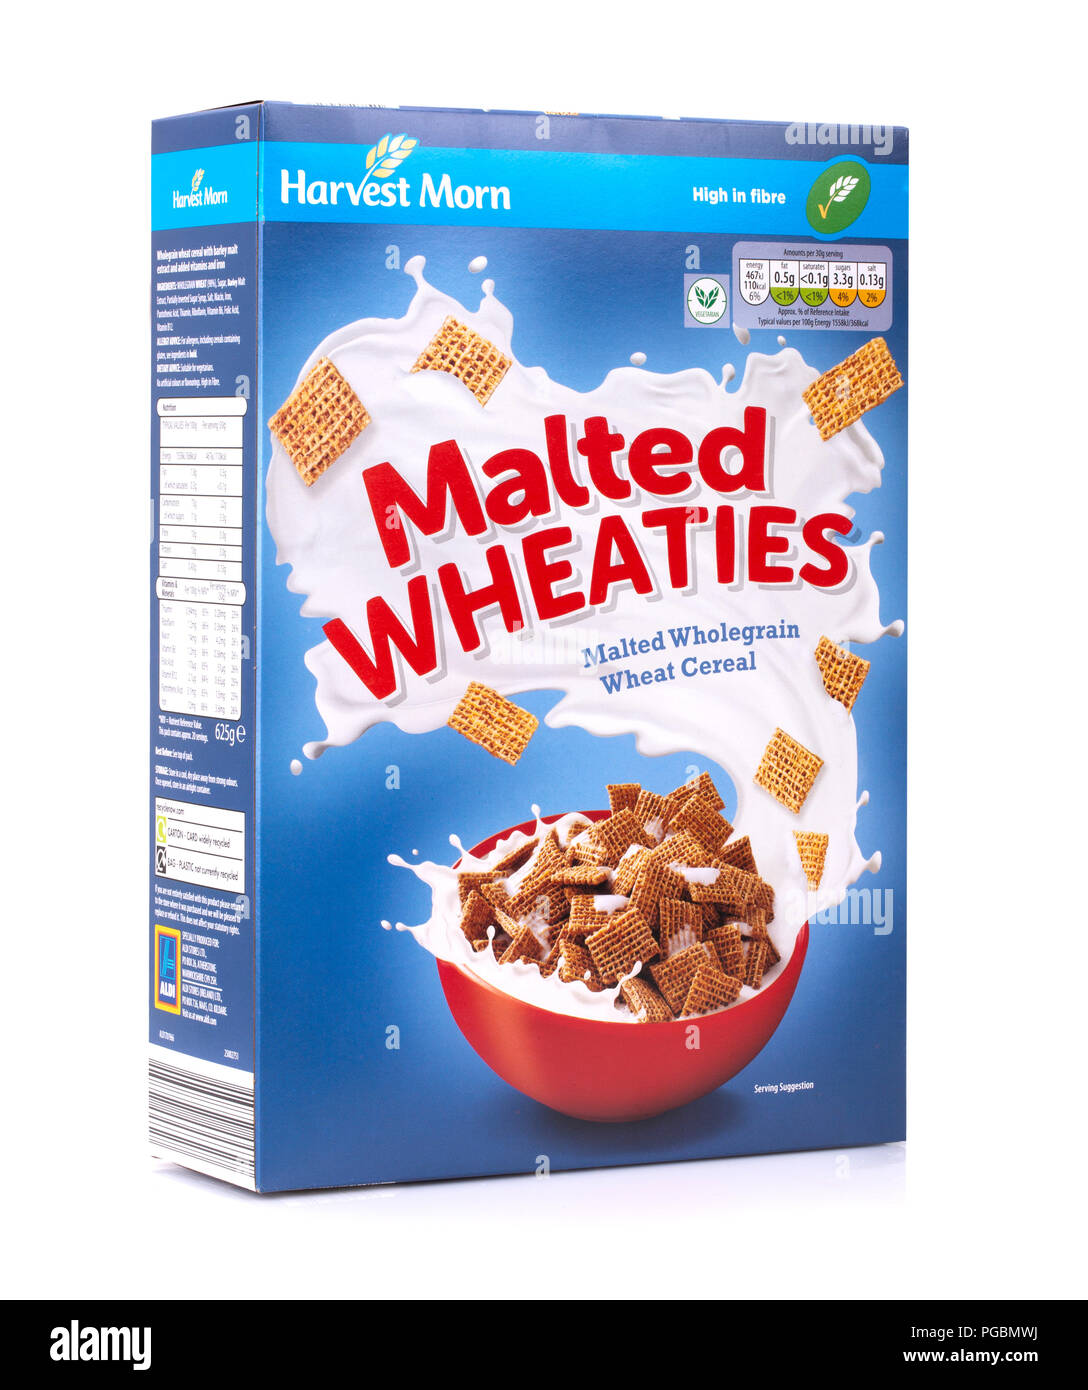 SWINDON, UK - AUGUST 18, 2018: Packet of Aldi Malted Wheaties on a White Background Stock Photo